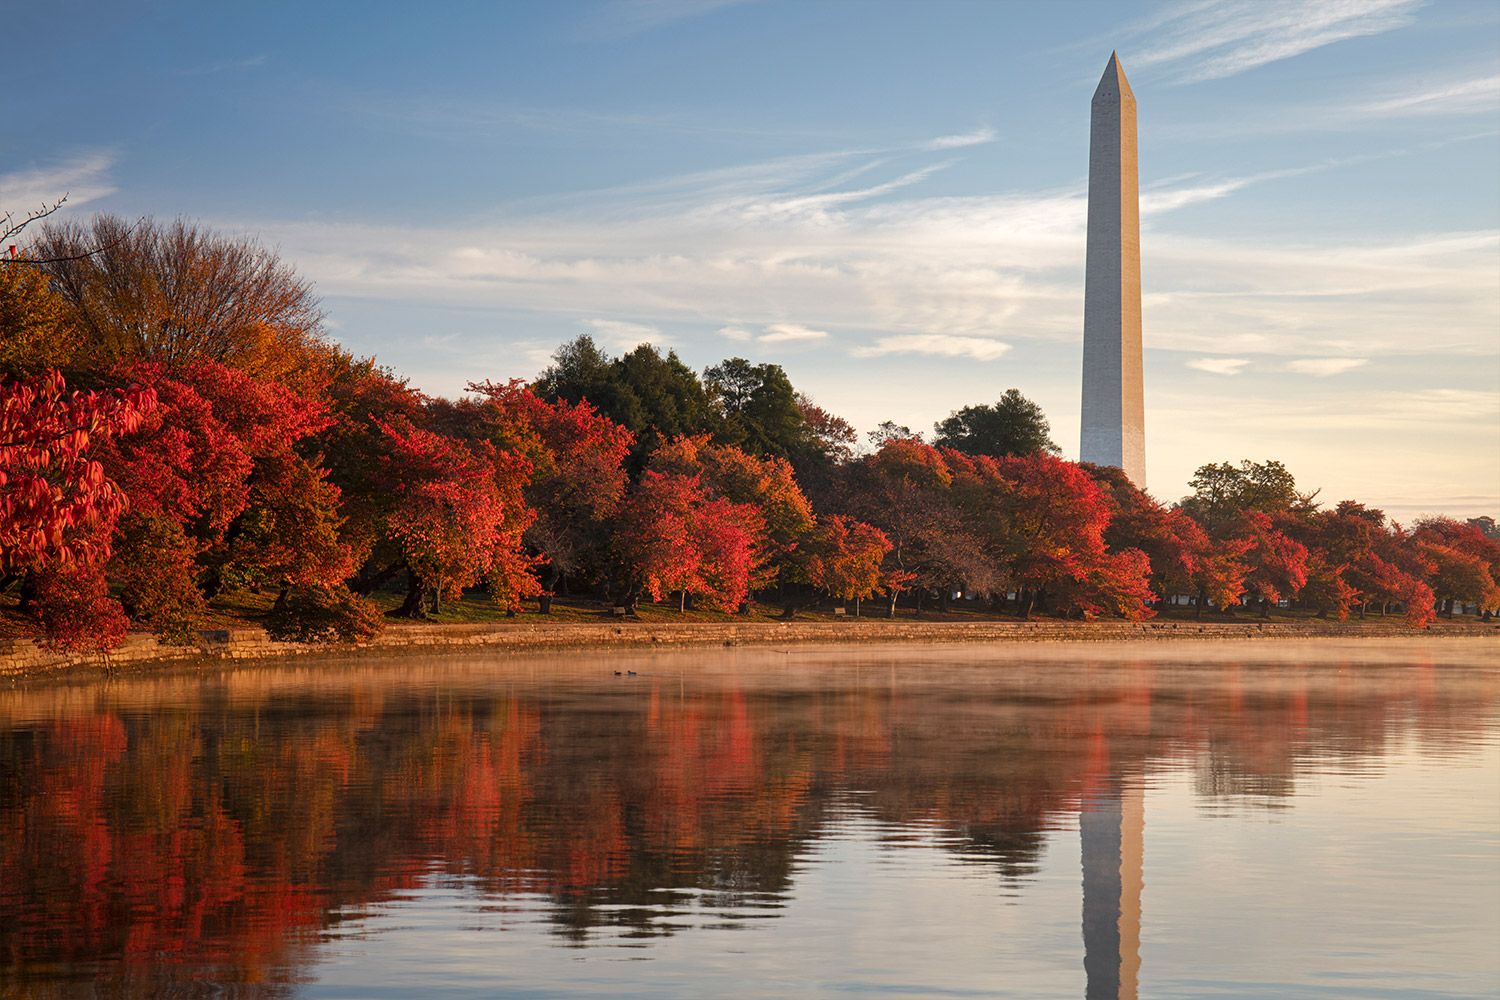 View of red trees and the Washington Monument with scene reflecting on the water